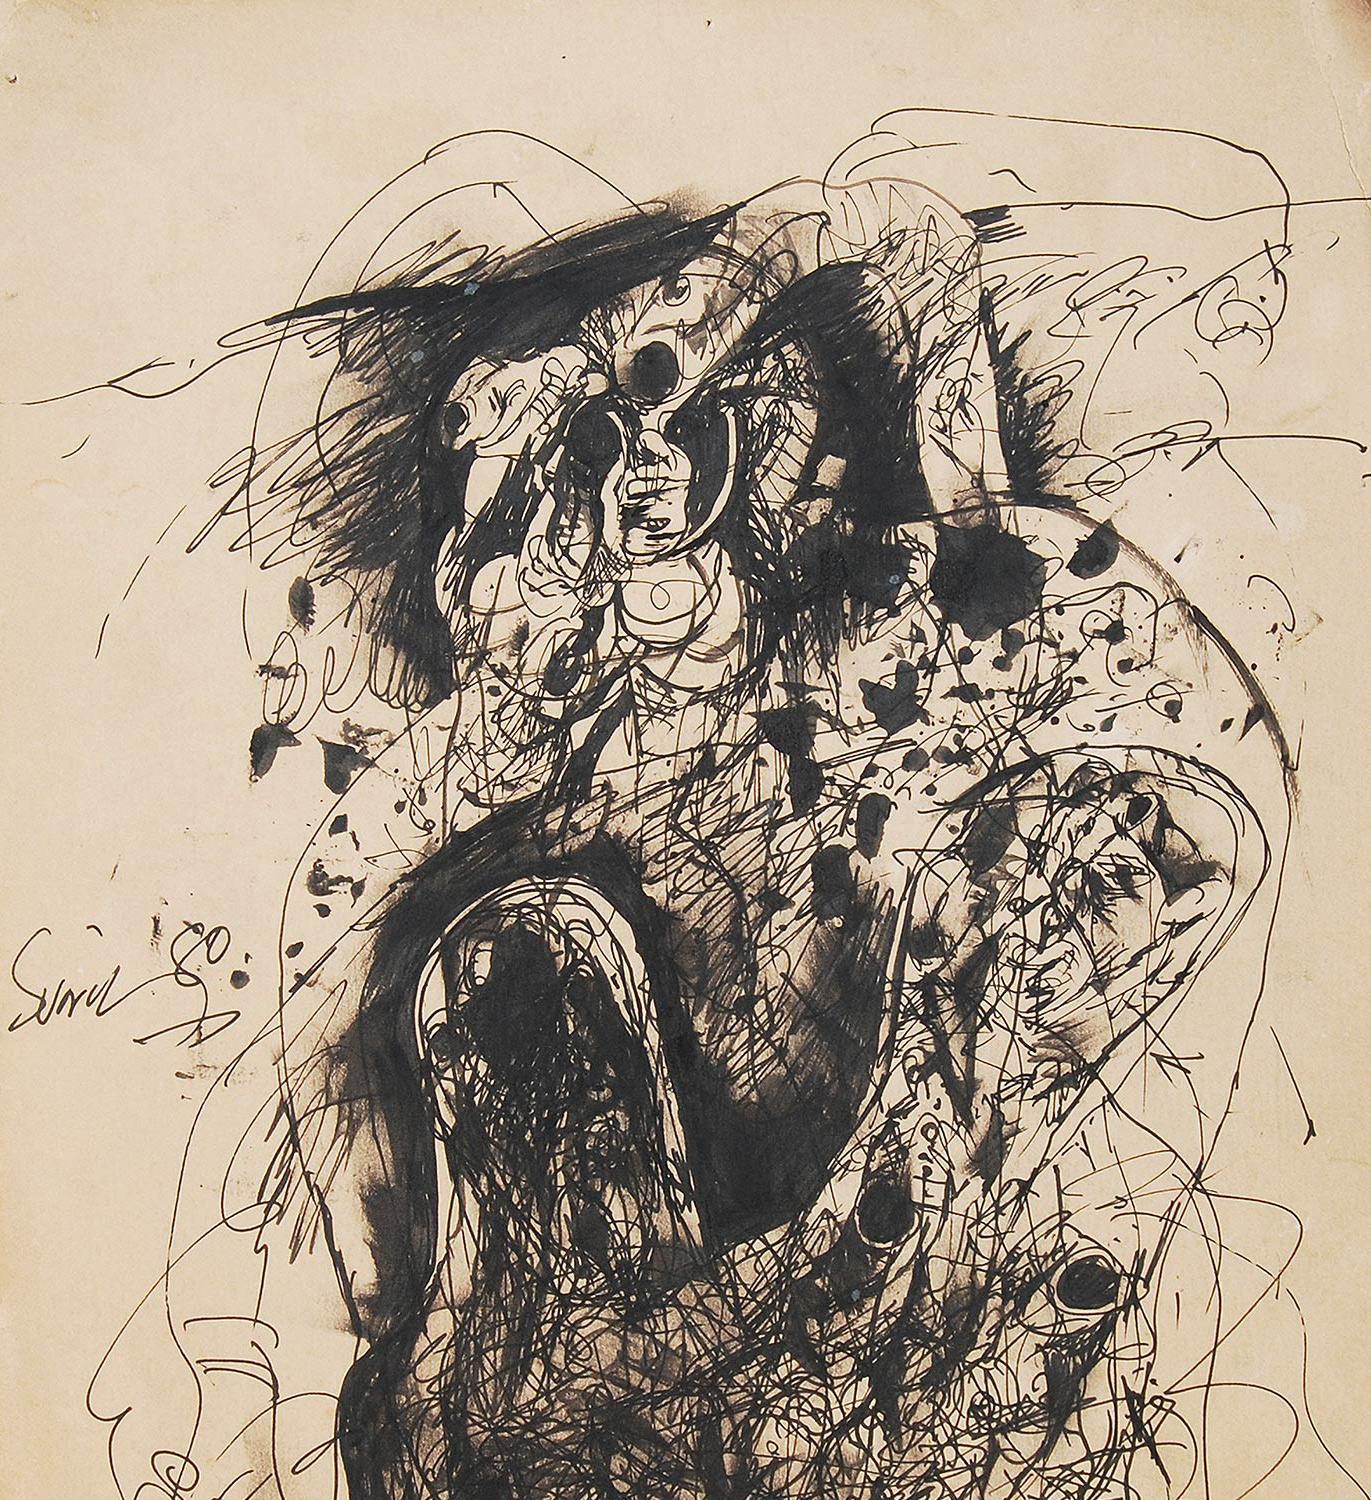 Sunil Das - Untitled - 13.5 x 10.5 inches (unframed size)
Jottings, Pen & Ink on Paper
Inclusive of shipment in ready to hang form.

Sunil Das (1939-2015) was a Master Modern Indian Artist from Bengal. Extremely successful right from his college